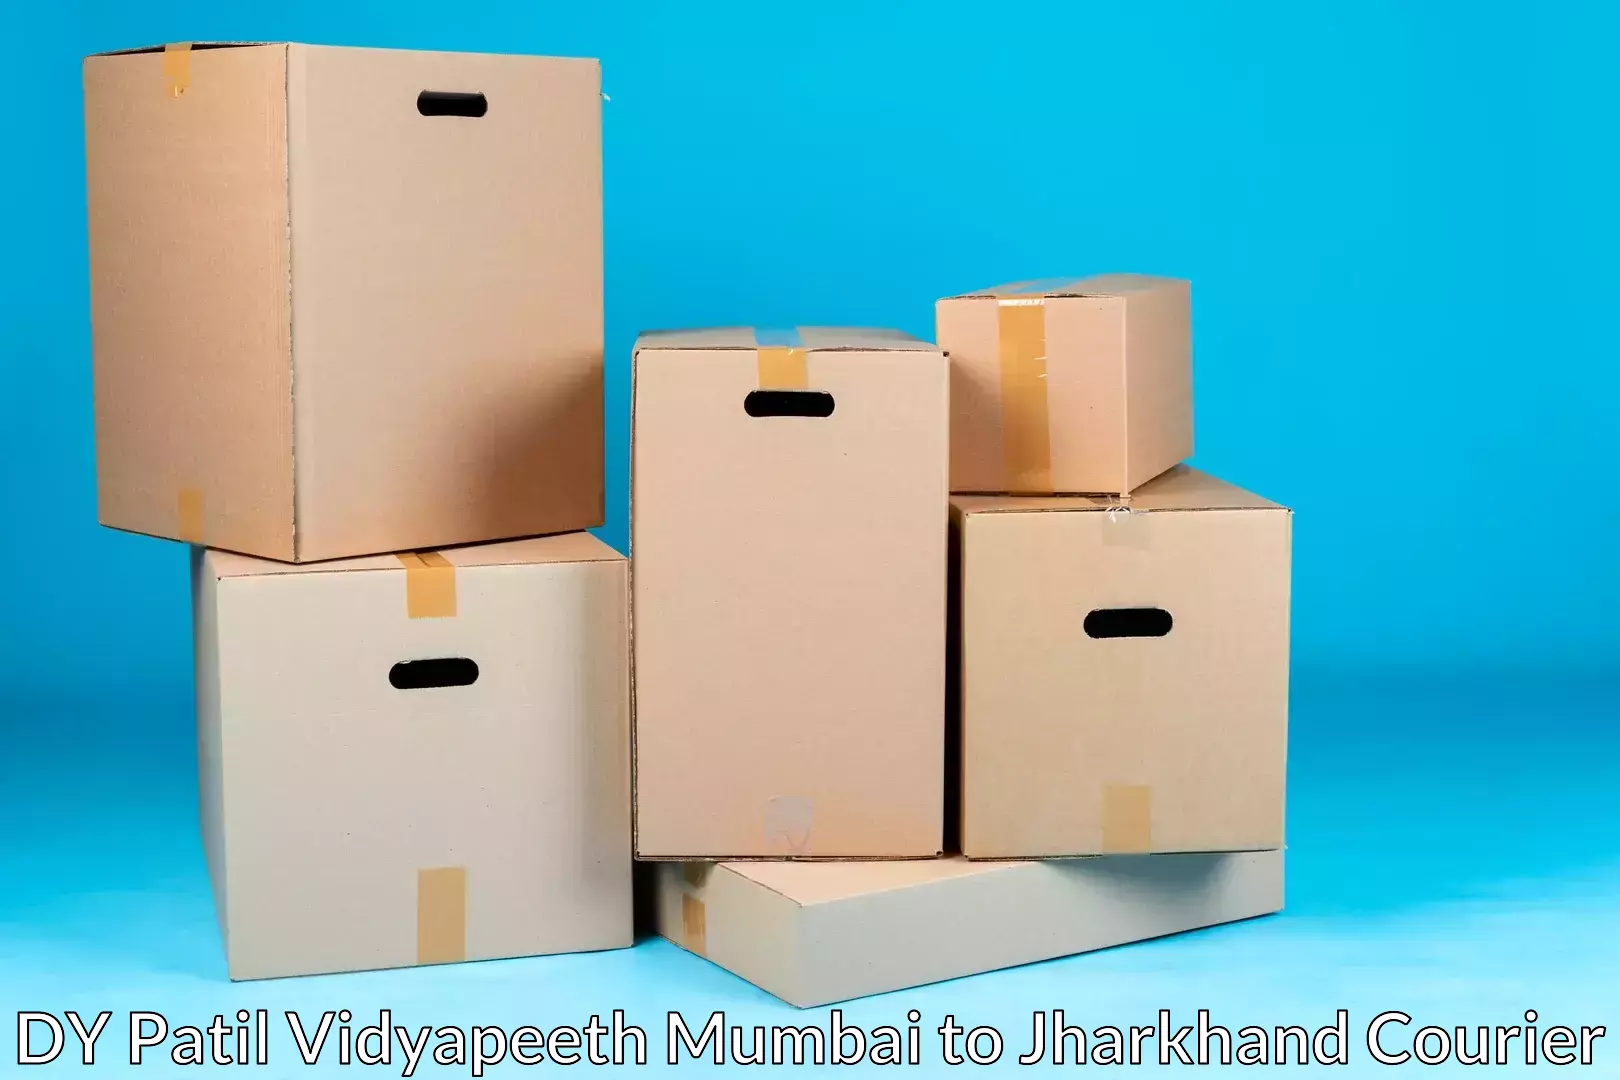 Advanced moving solutions in DY Patil Vidyapeeth Mumbai to Chouparan